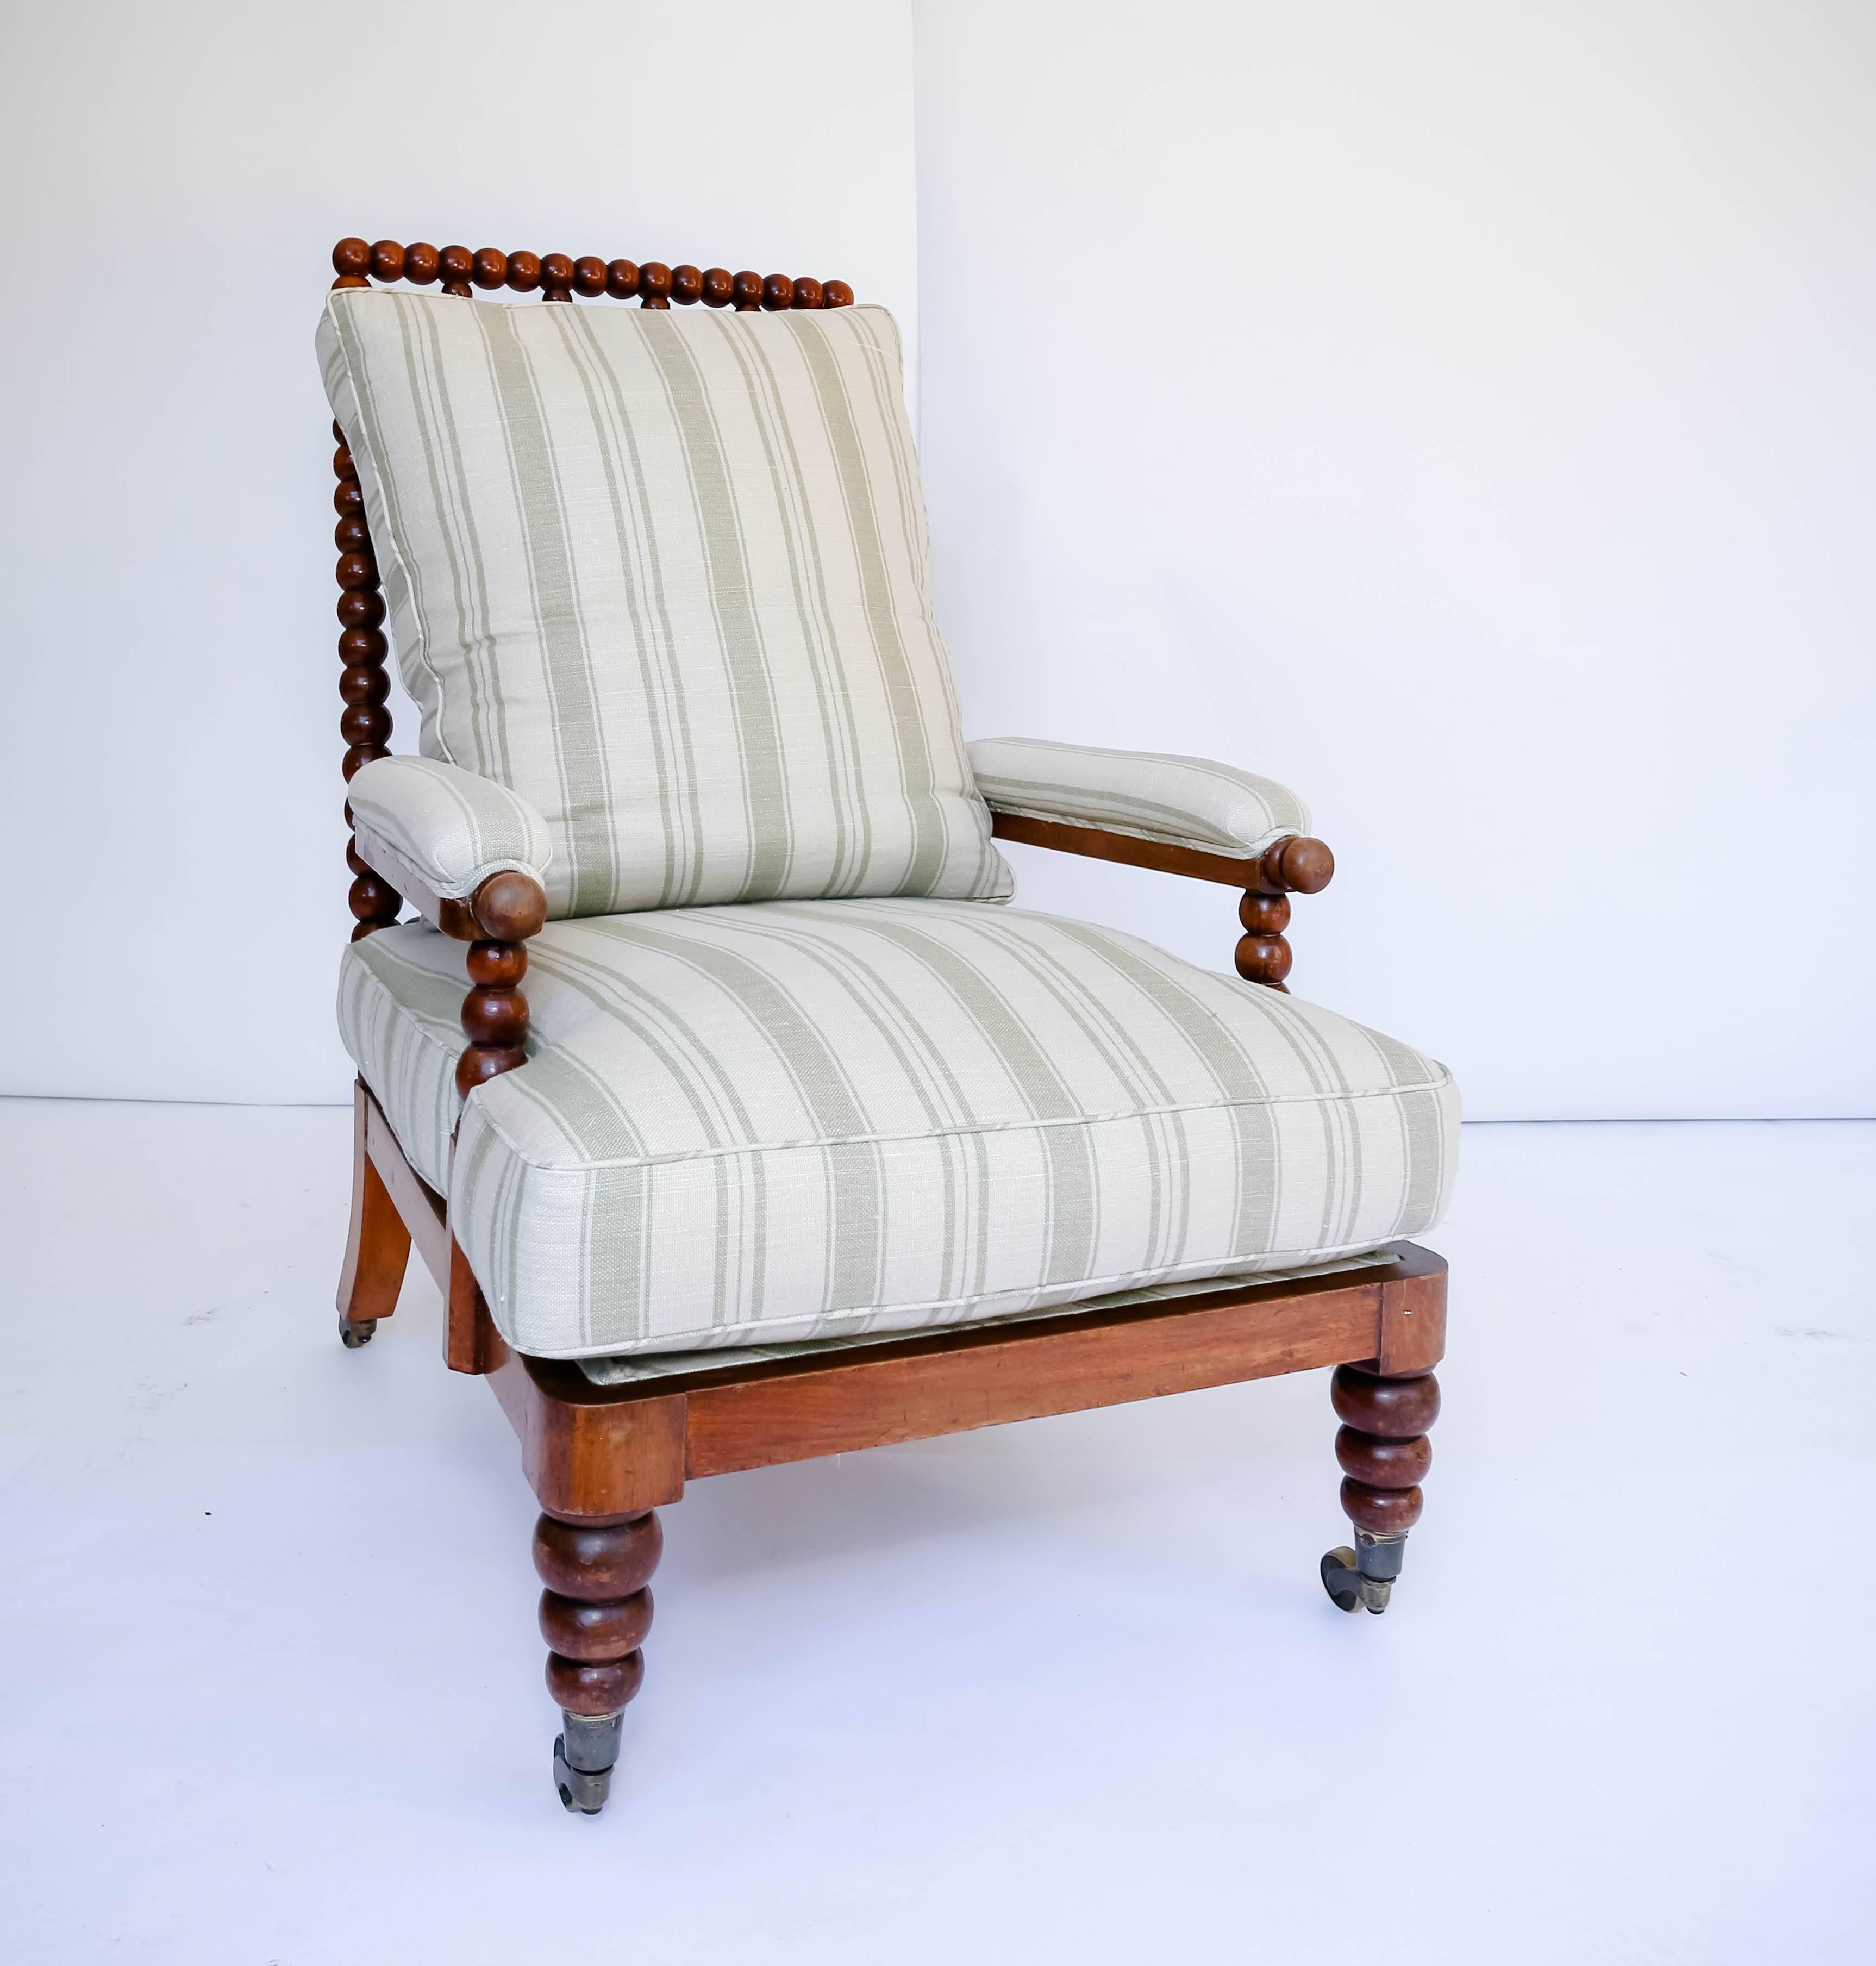 Antique English bobbin-turned wooden armchair with single crest-rail and four spindle-slat back rest.  Front turned and rear splayed legs fitted with brass roller castors, striped linen upholstery. 